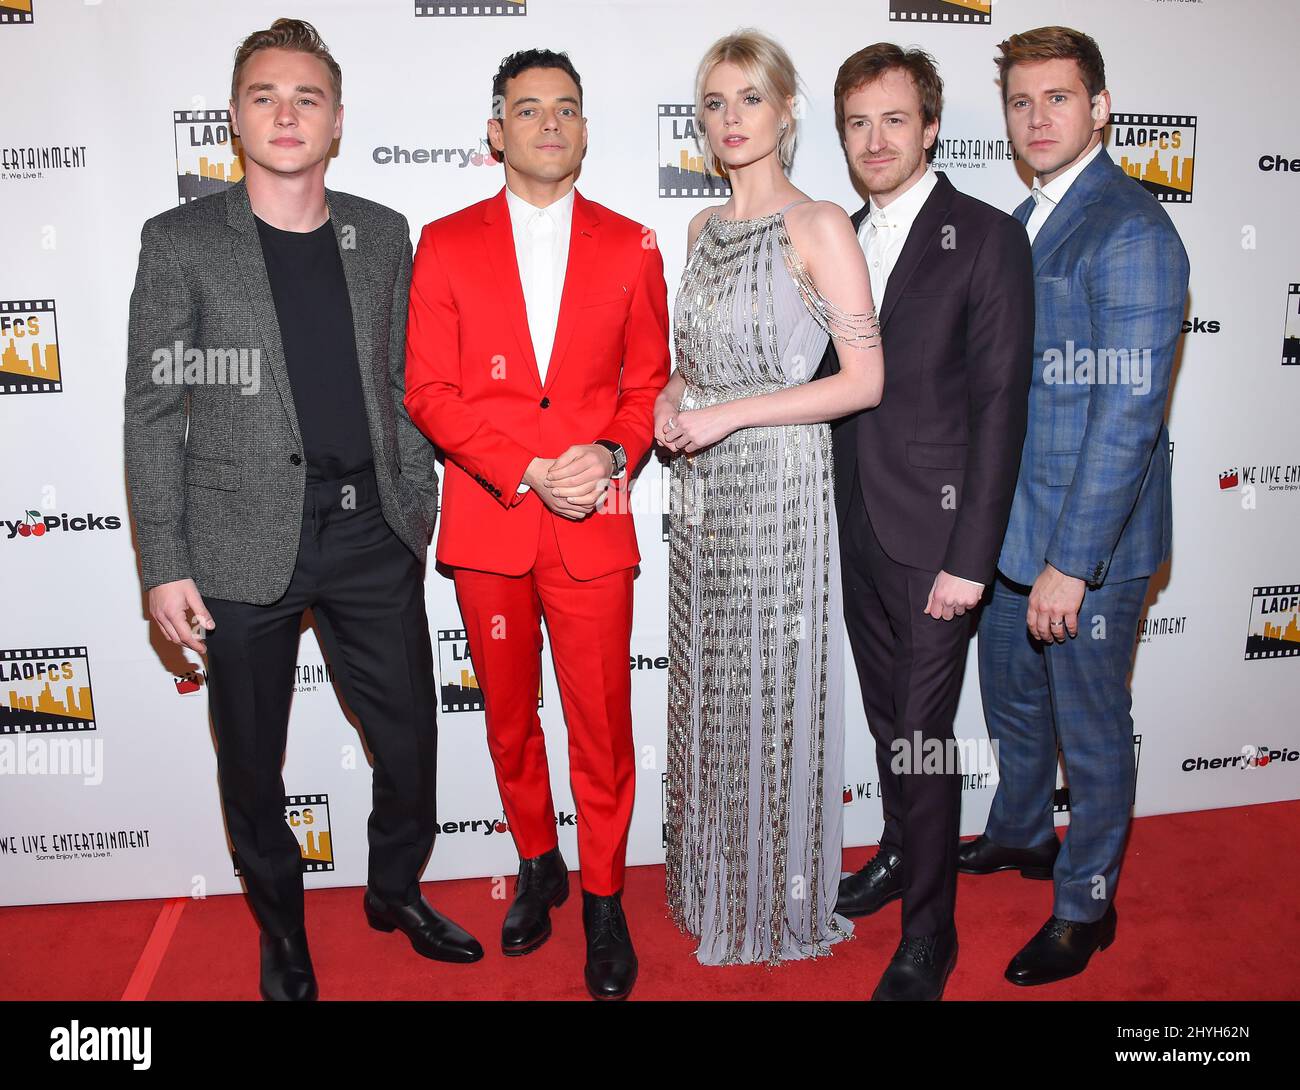 Ben Hardy, Rami Malek, Lucy Boynton, Joe Mazzello and Allen Leec at the 2nd Annual Los Angeles Online Film Critics Society Awards held at the Taglyan Complex Stock Photo